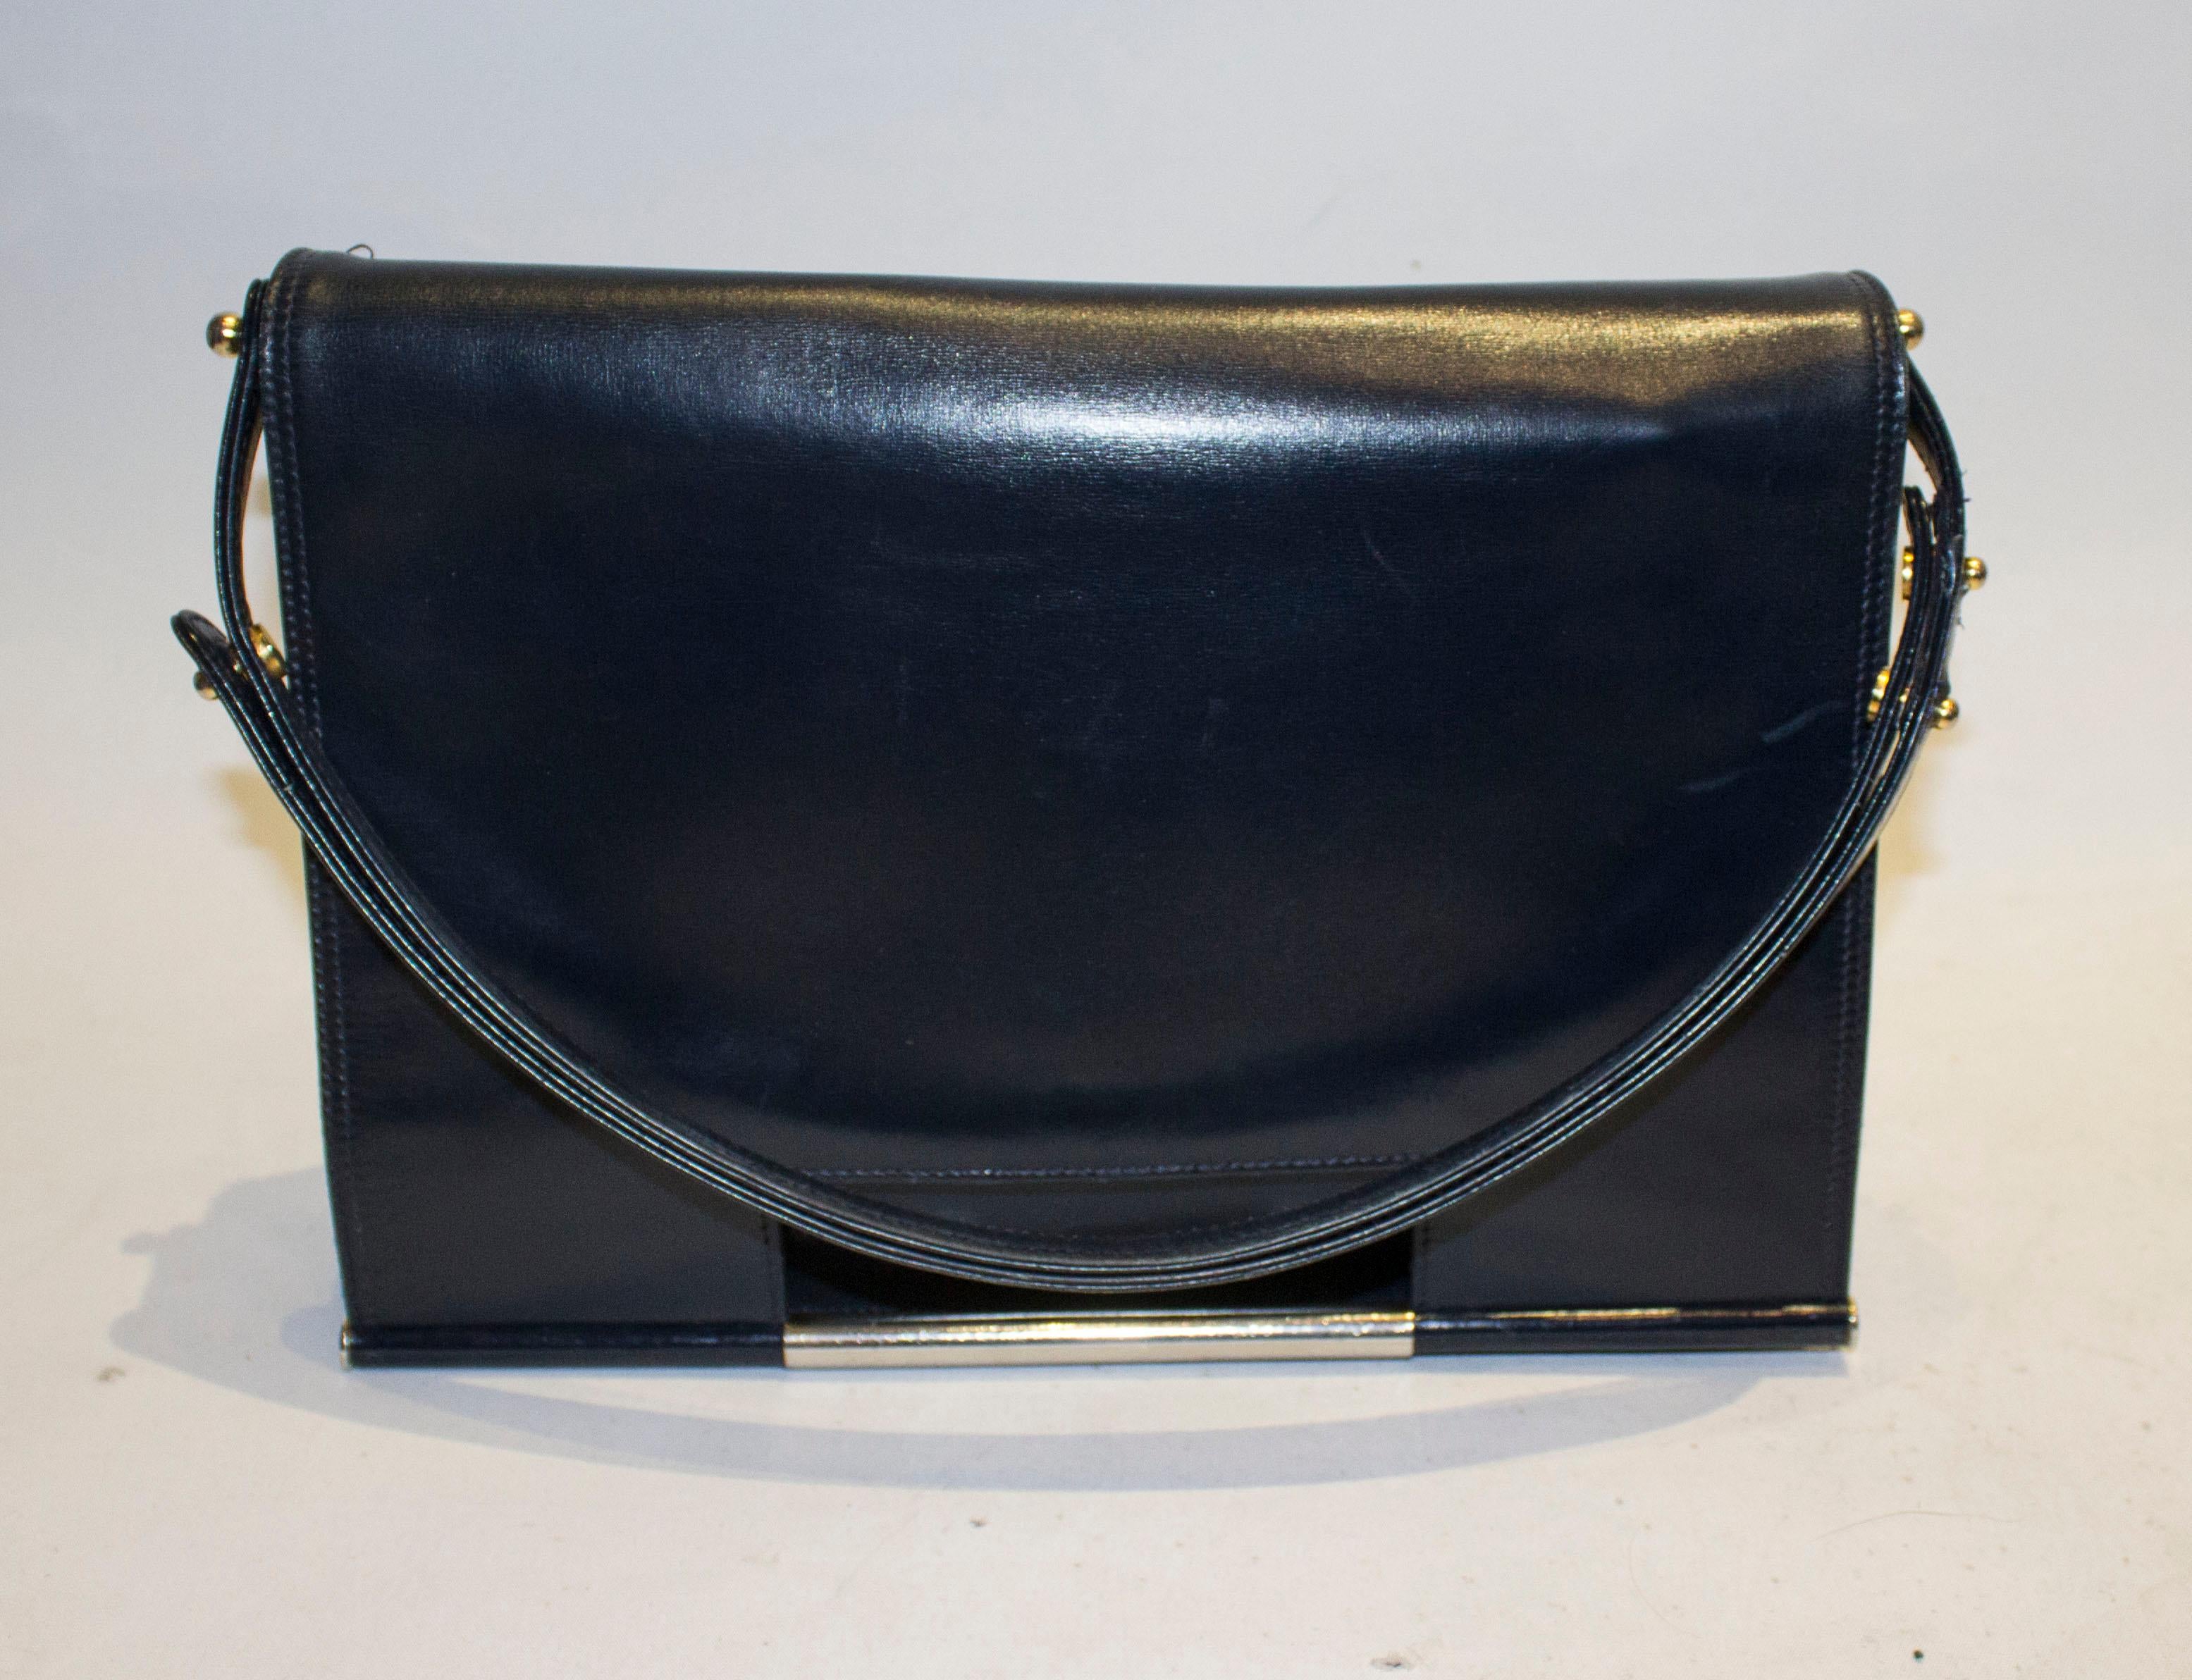 A chic vintage bag by Launer ( Bag maker to the Queen). In a deep navy blue , the bag has a flapover front with popper fastening, and back pouch pocket. Inside there is a zip compartment in the lid ( similar to Chanel) and two compartments , one